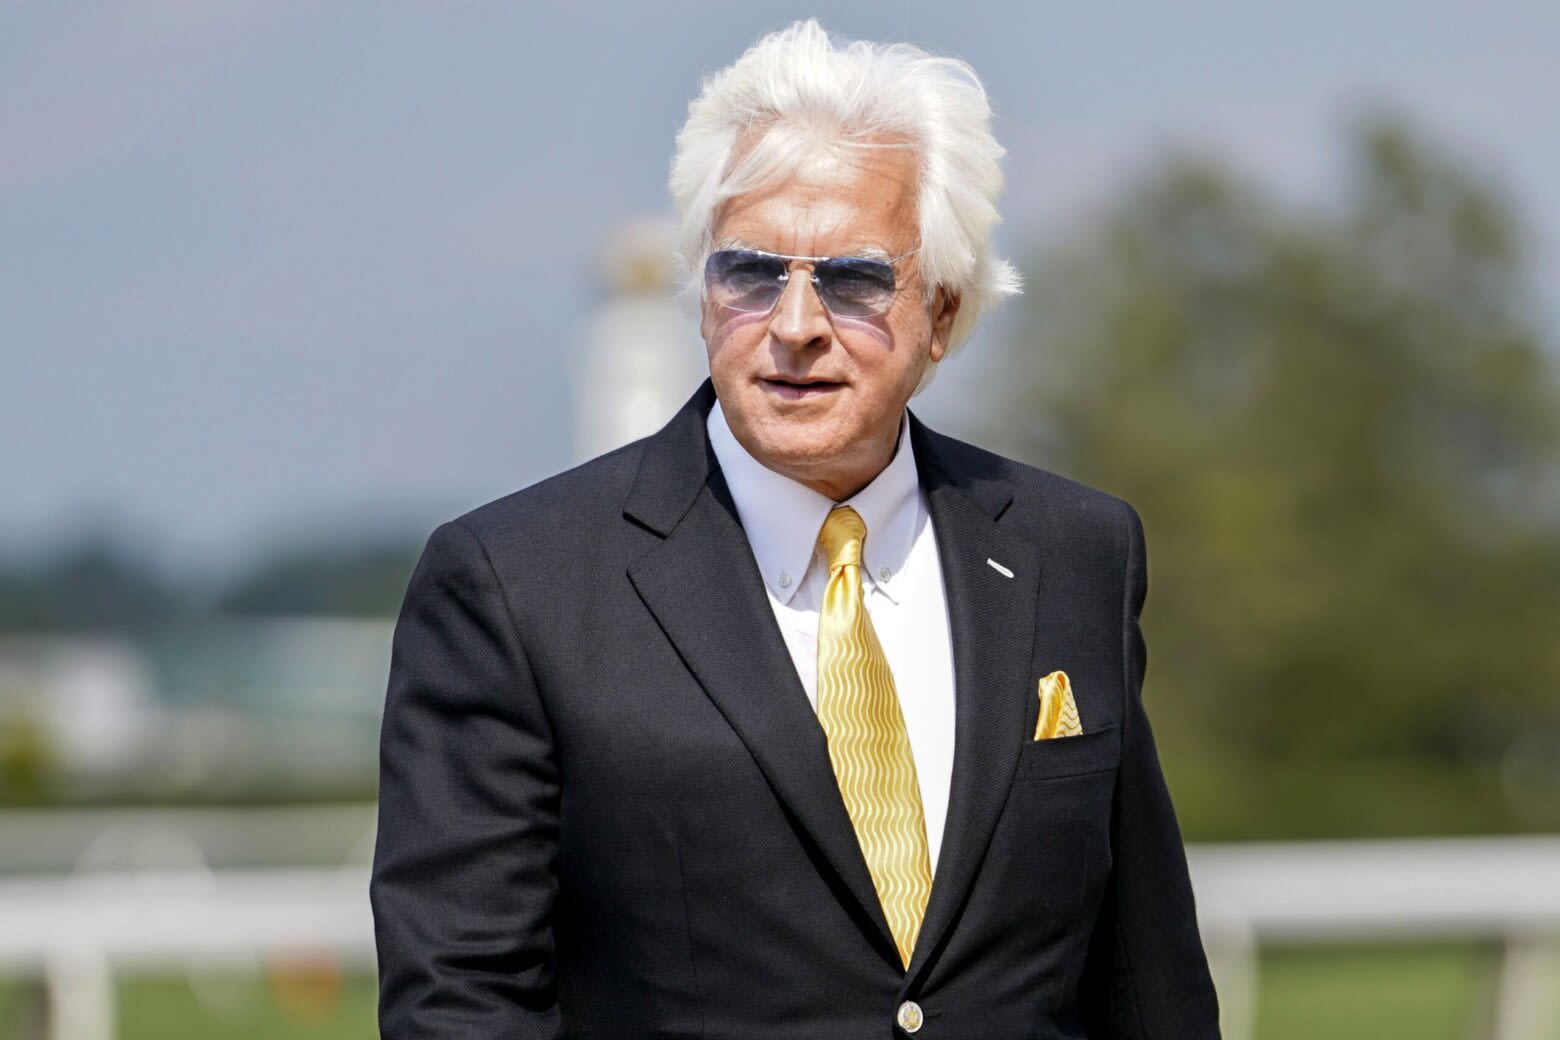 Horse racing’s household name will miss the 150th Kentucky Derby. Bob Baffert is exiled for 3rd year - WTOP News